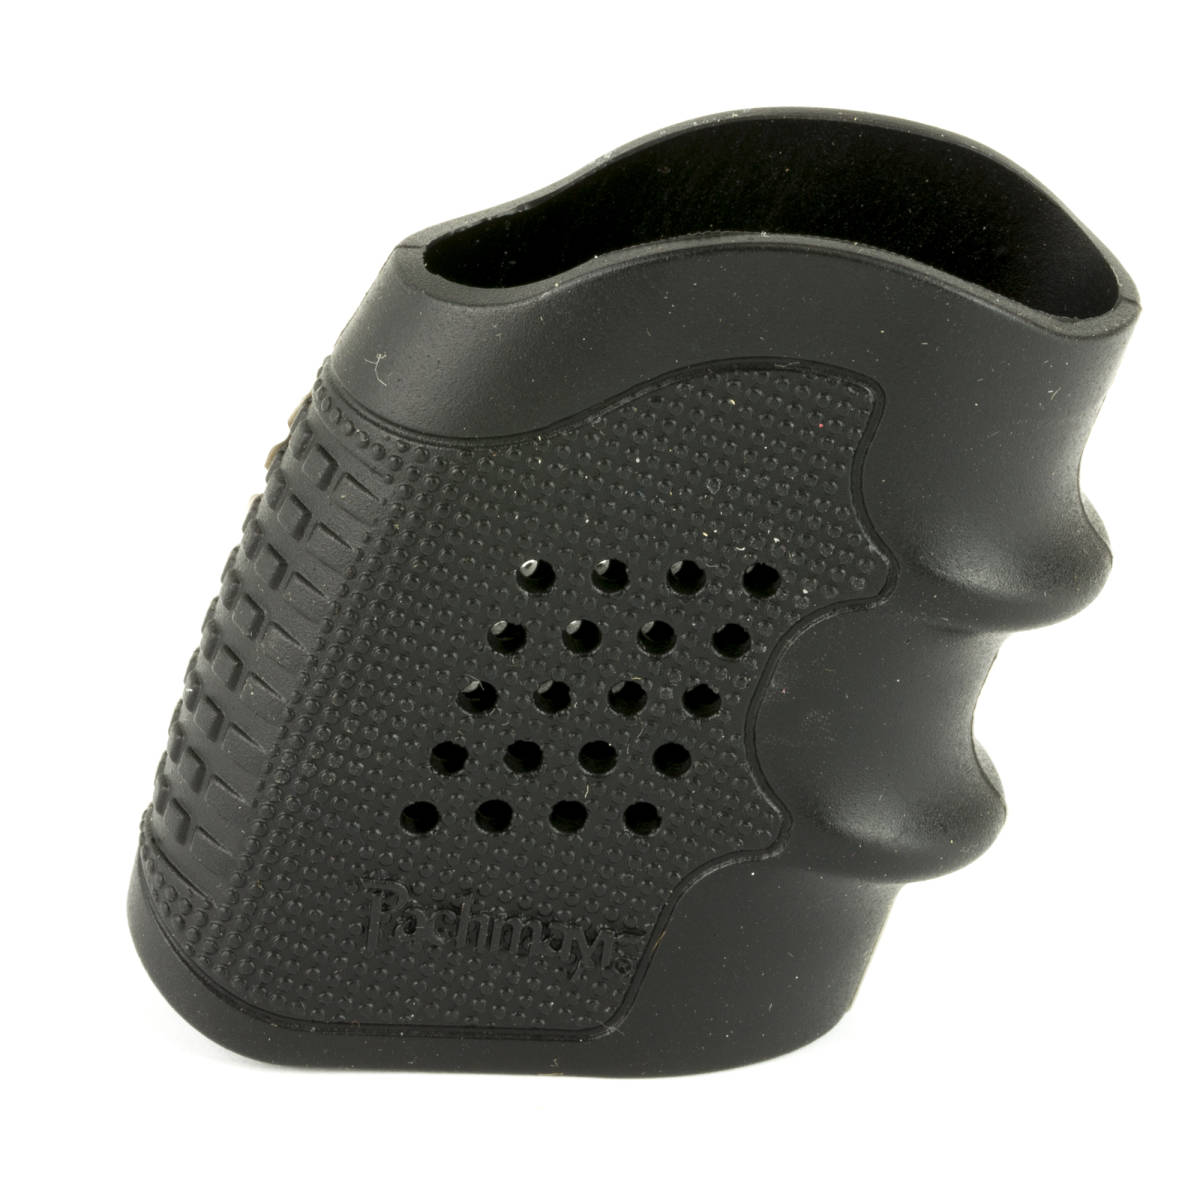 Pachmayr 05170 Tactical Grip Glove Black Rubber-img-1